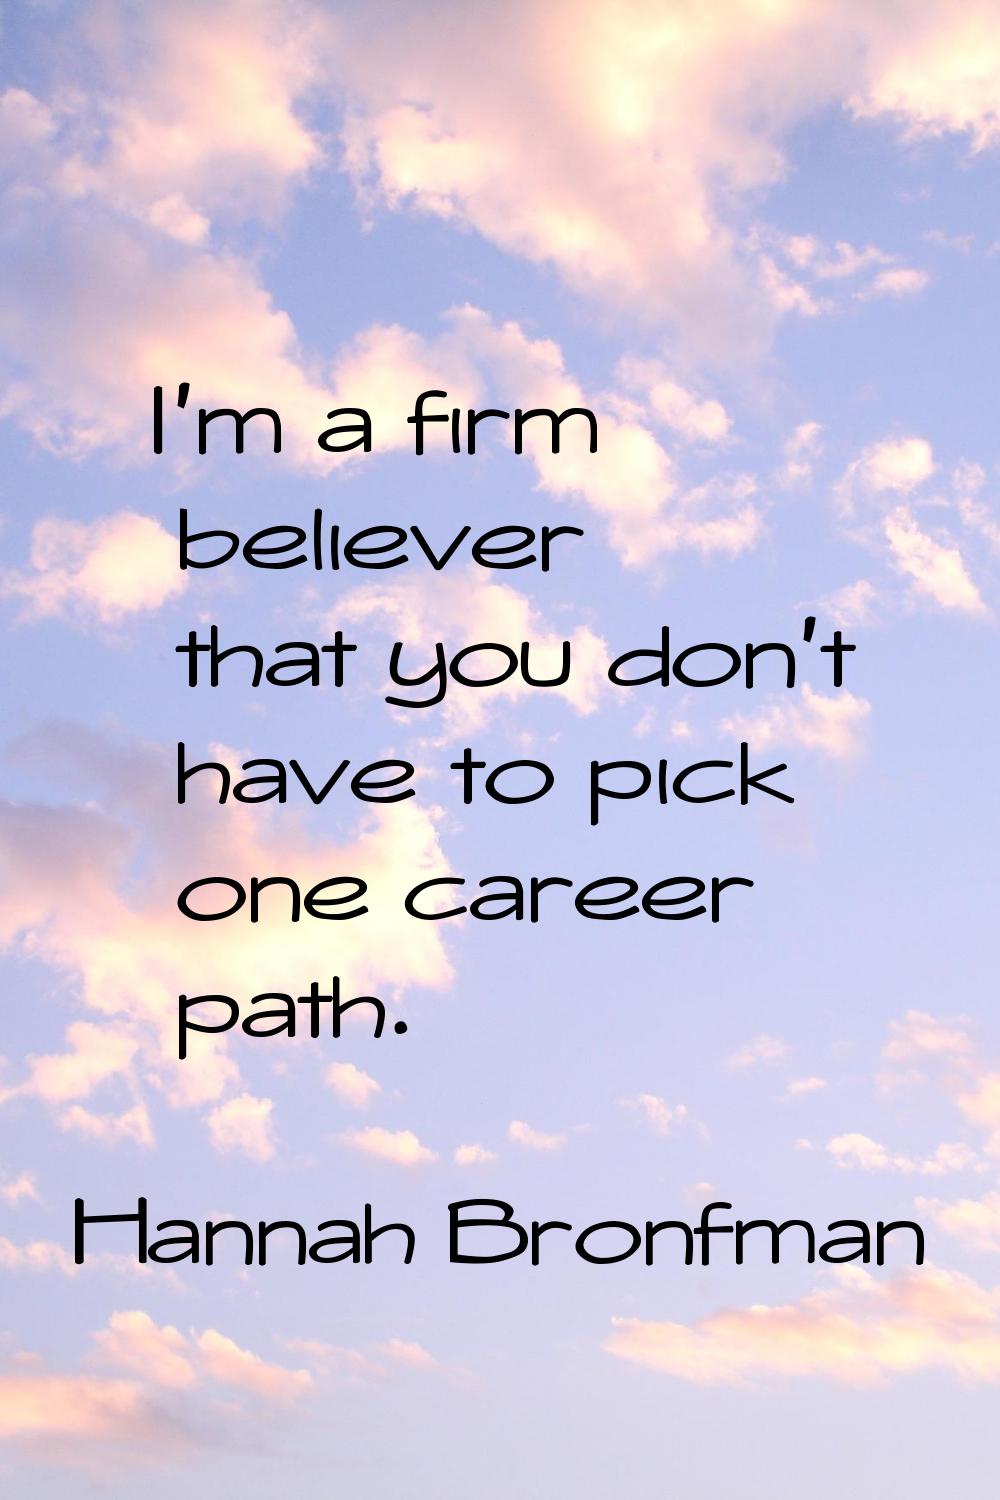 I'm a firm believer that you don't have to pick one career path.